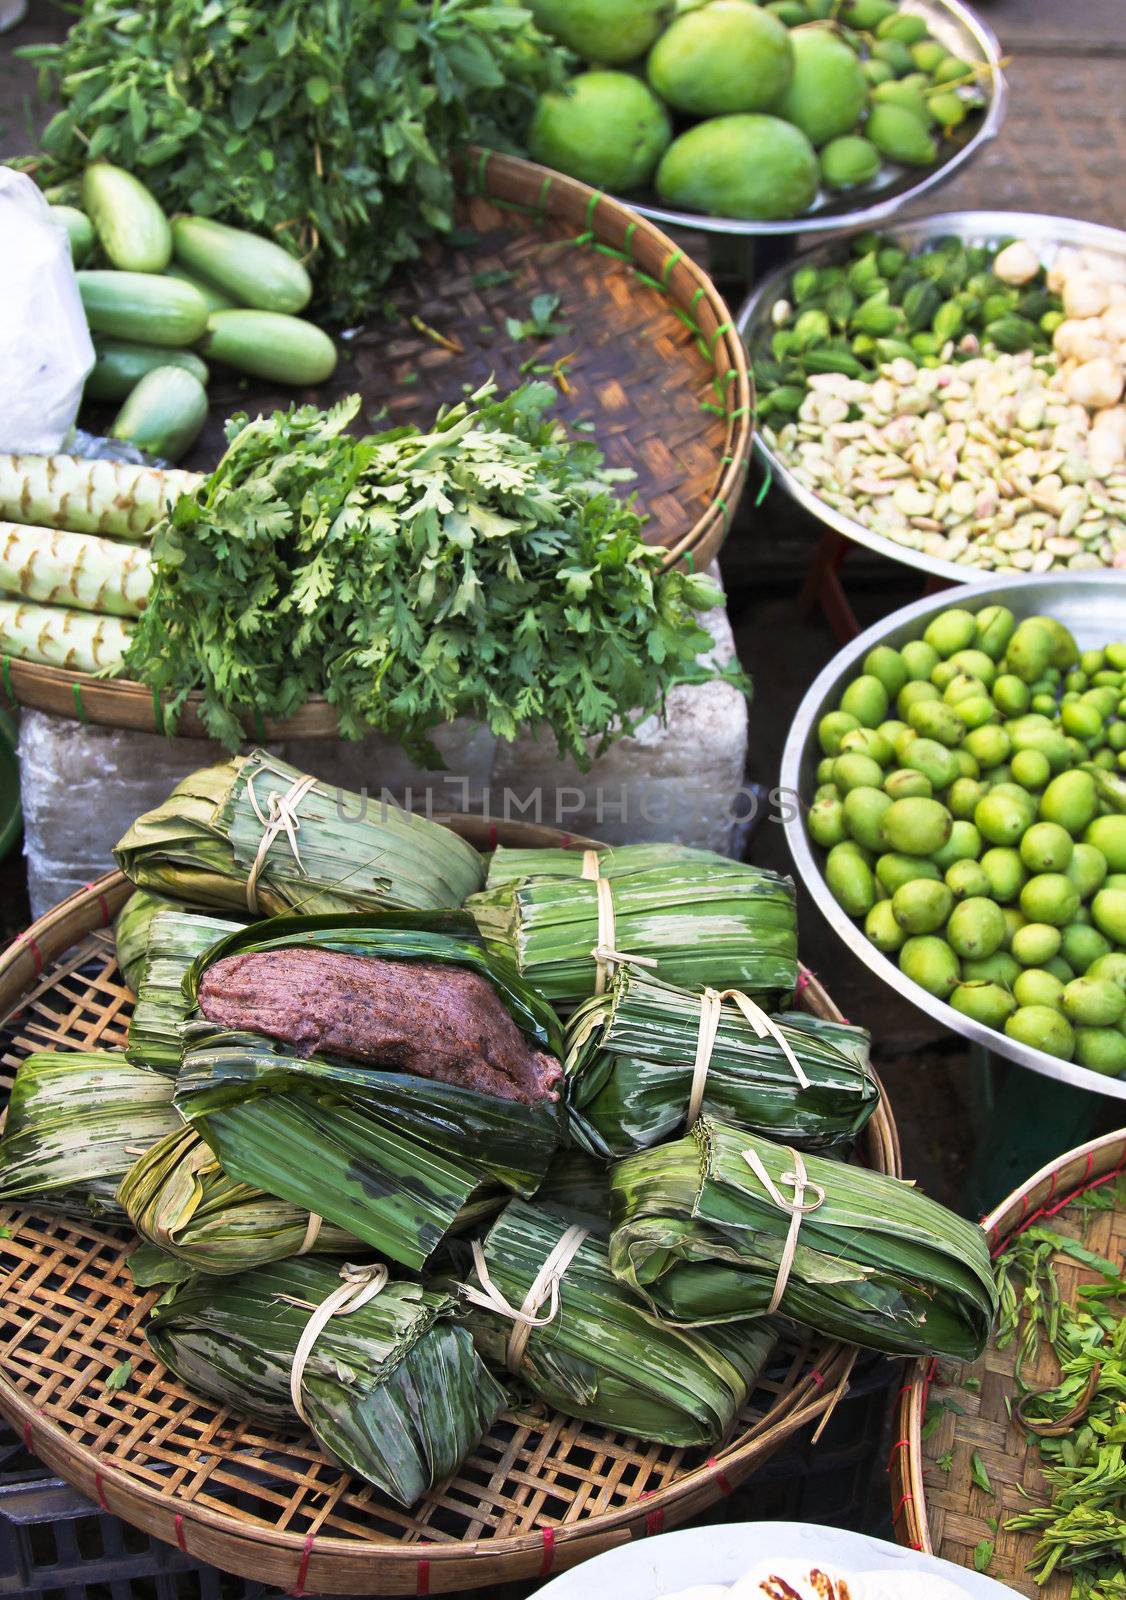 Vegetables stalls in a local Market in Yangon,Burma